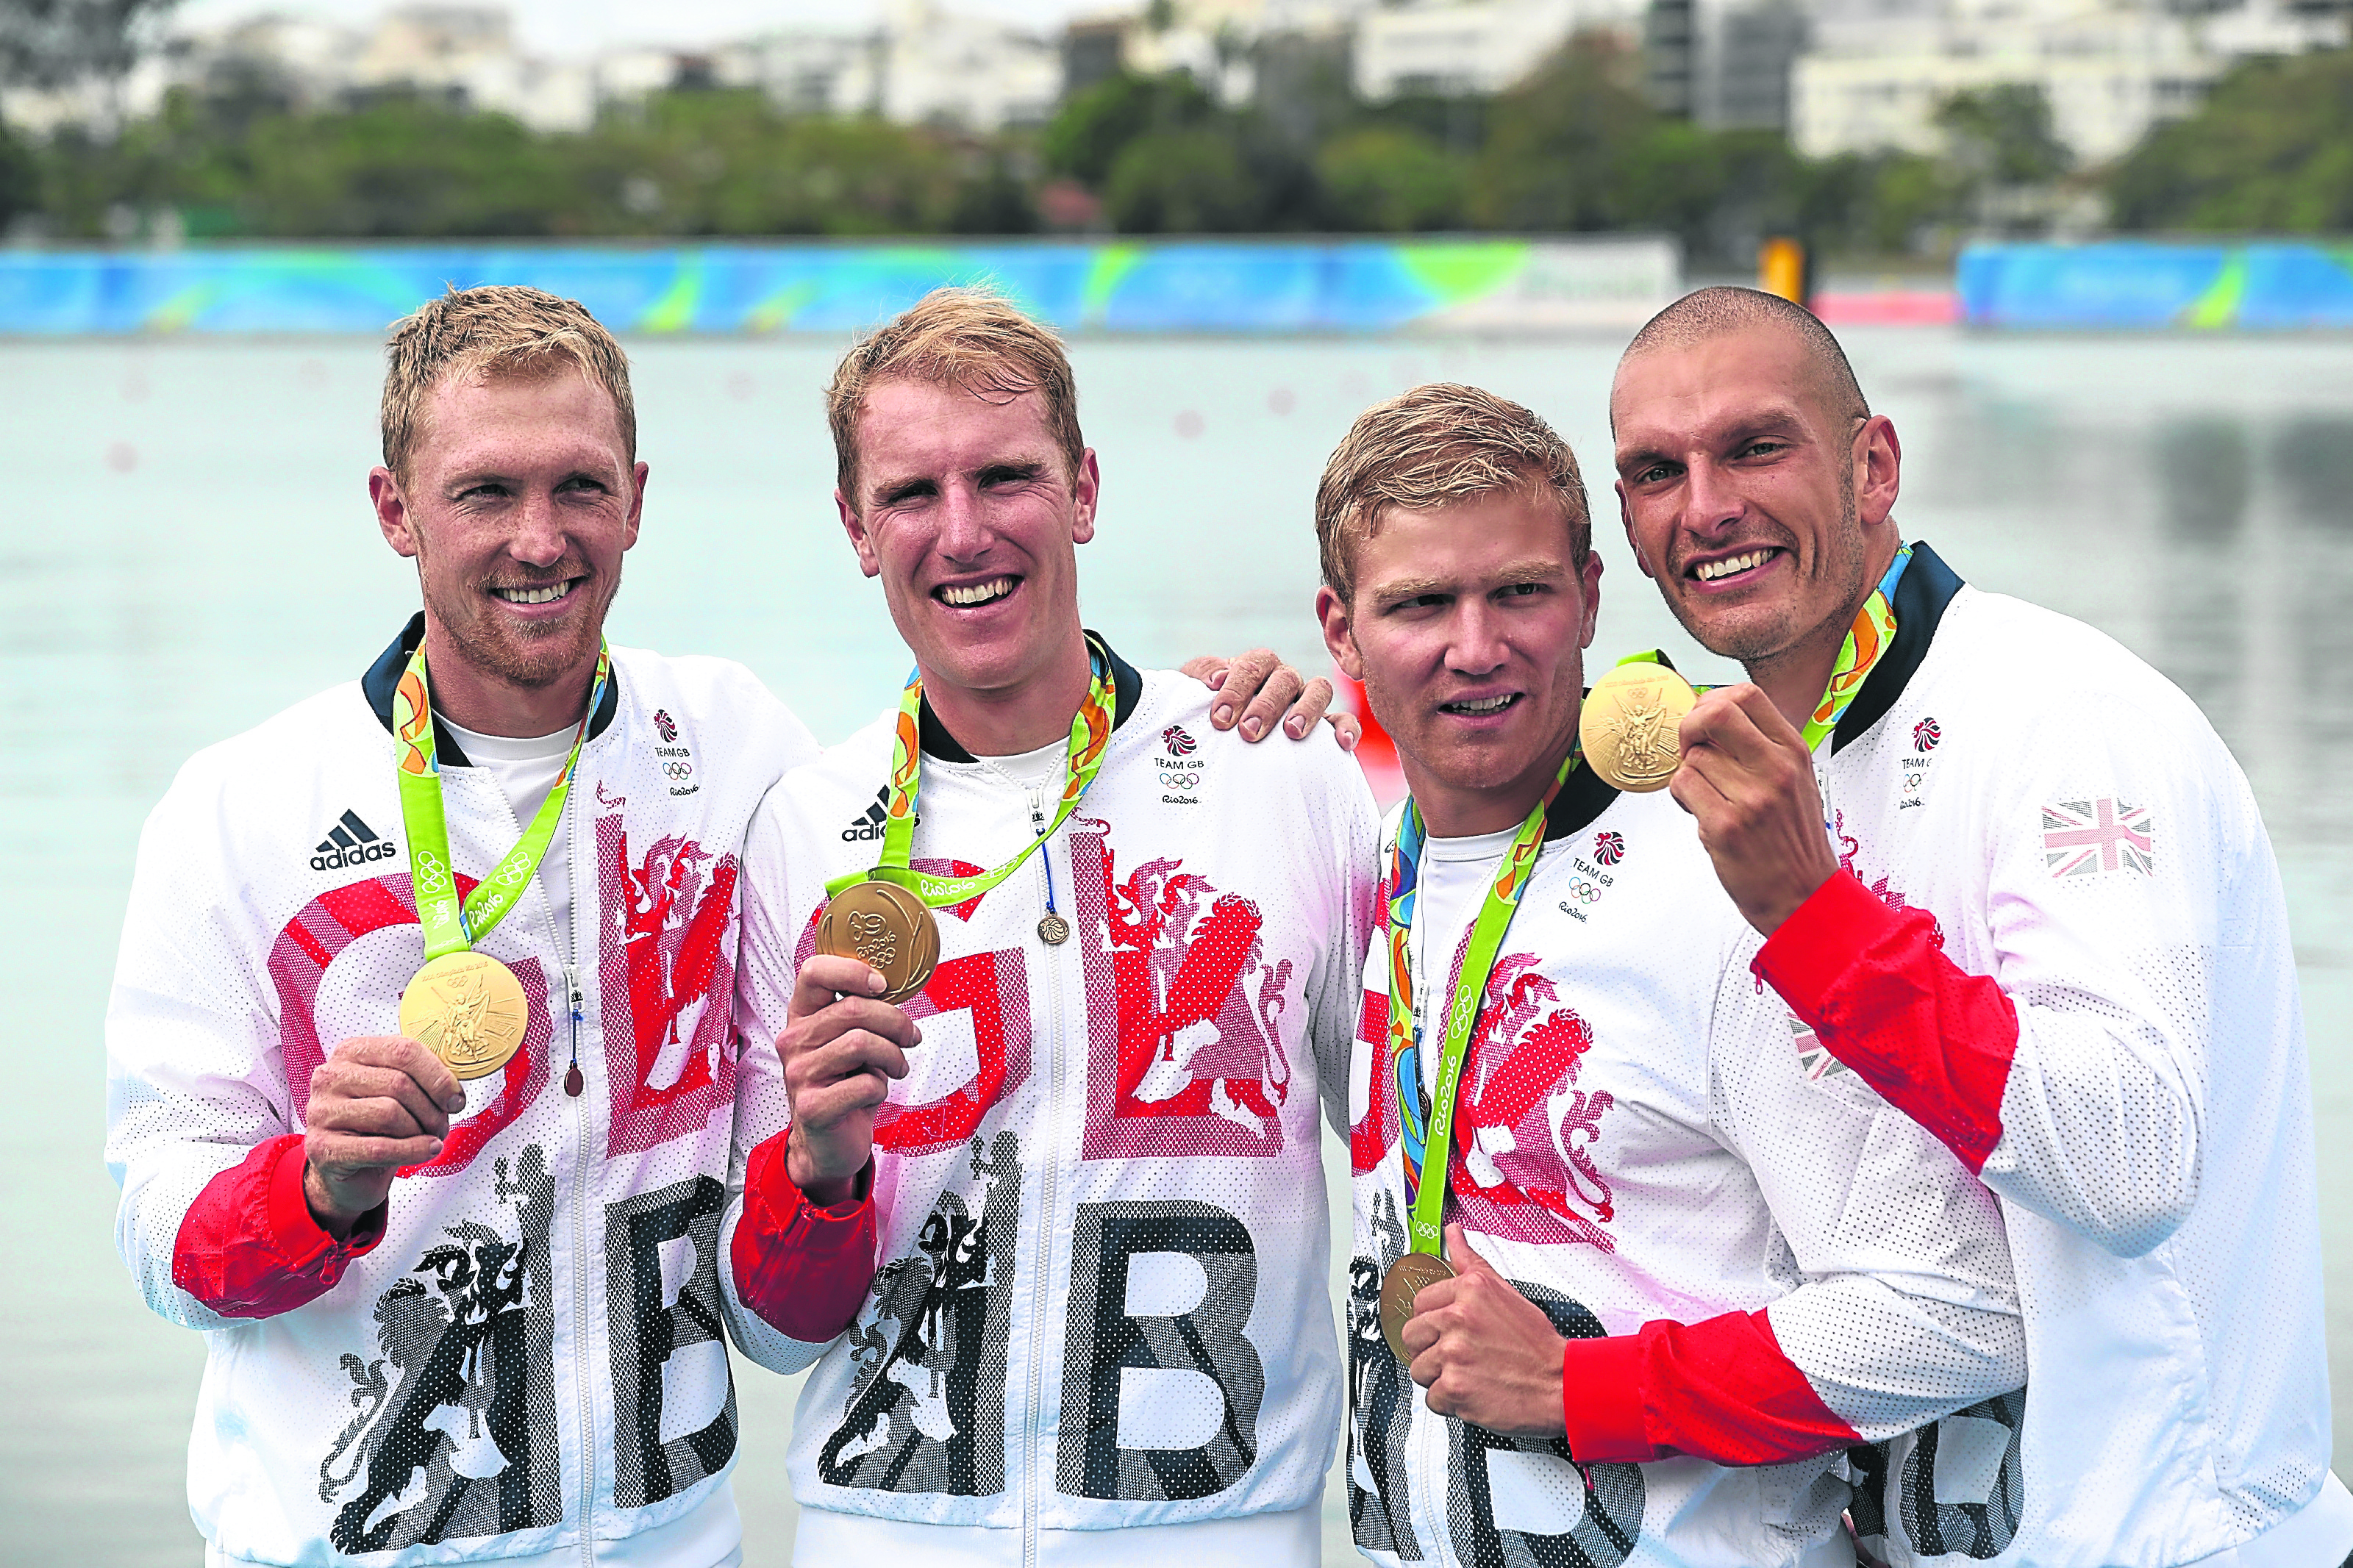 Gold medalists Alex Gregory, Mohamed Sbihi, George Nash and Constantine Louloudis of Great Britain (Photo by Ezra Shaw/Getty Images)